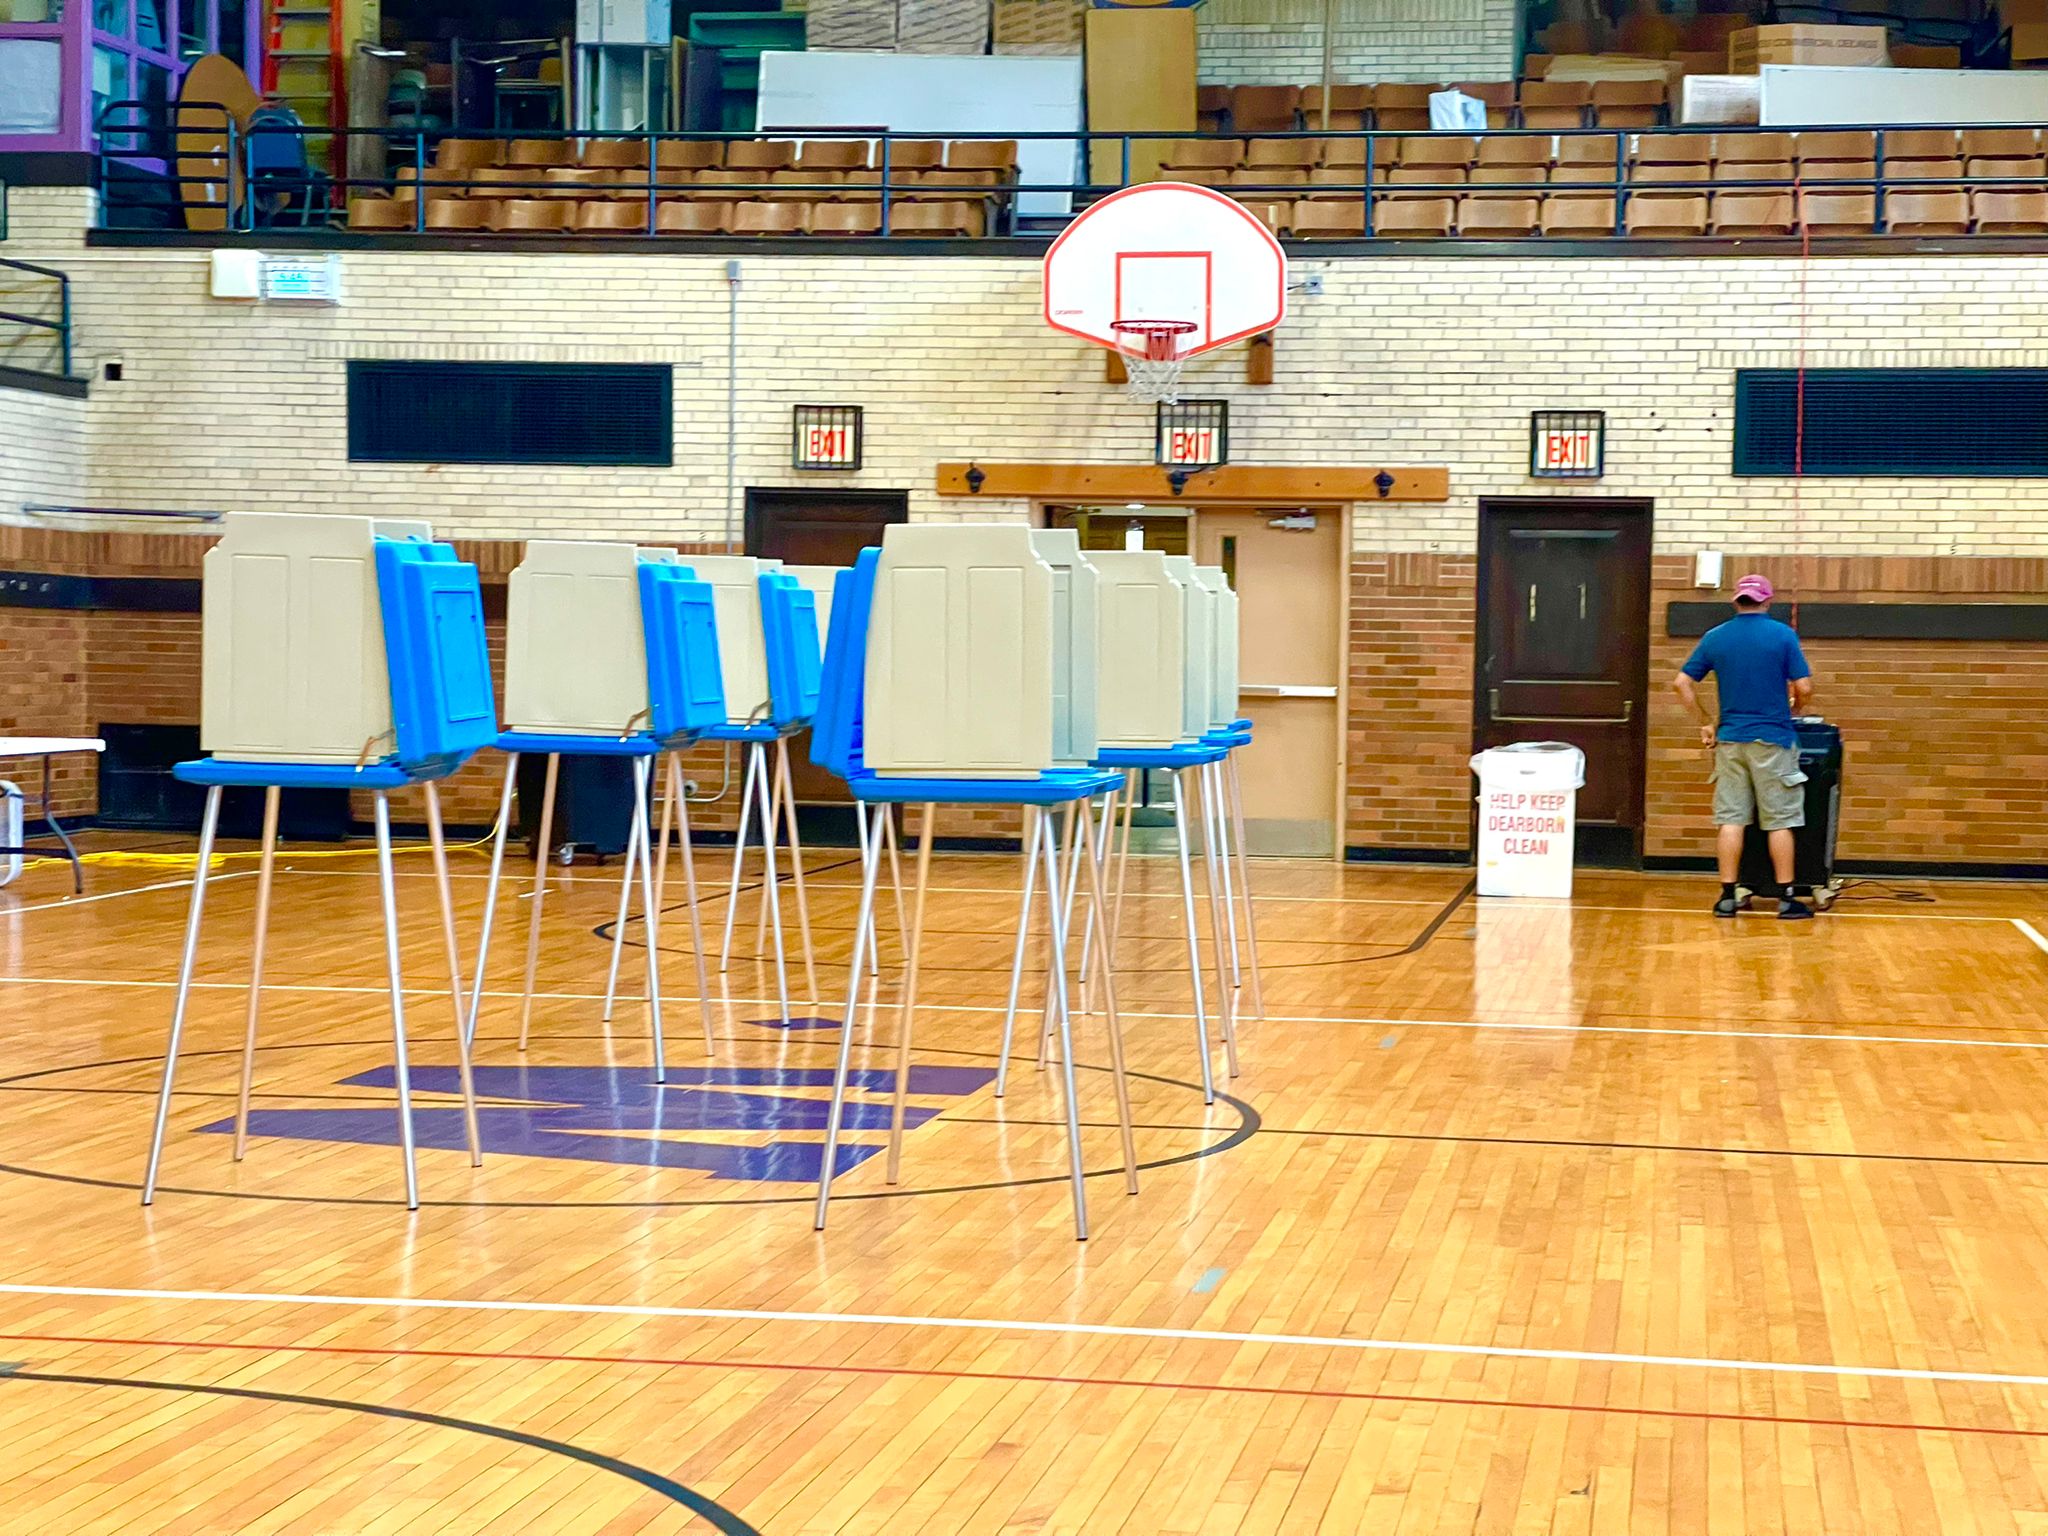 Voting booths at a precinct in Dearborn, August 2. Photo: Imad Mohamad/The Arab American News